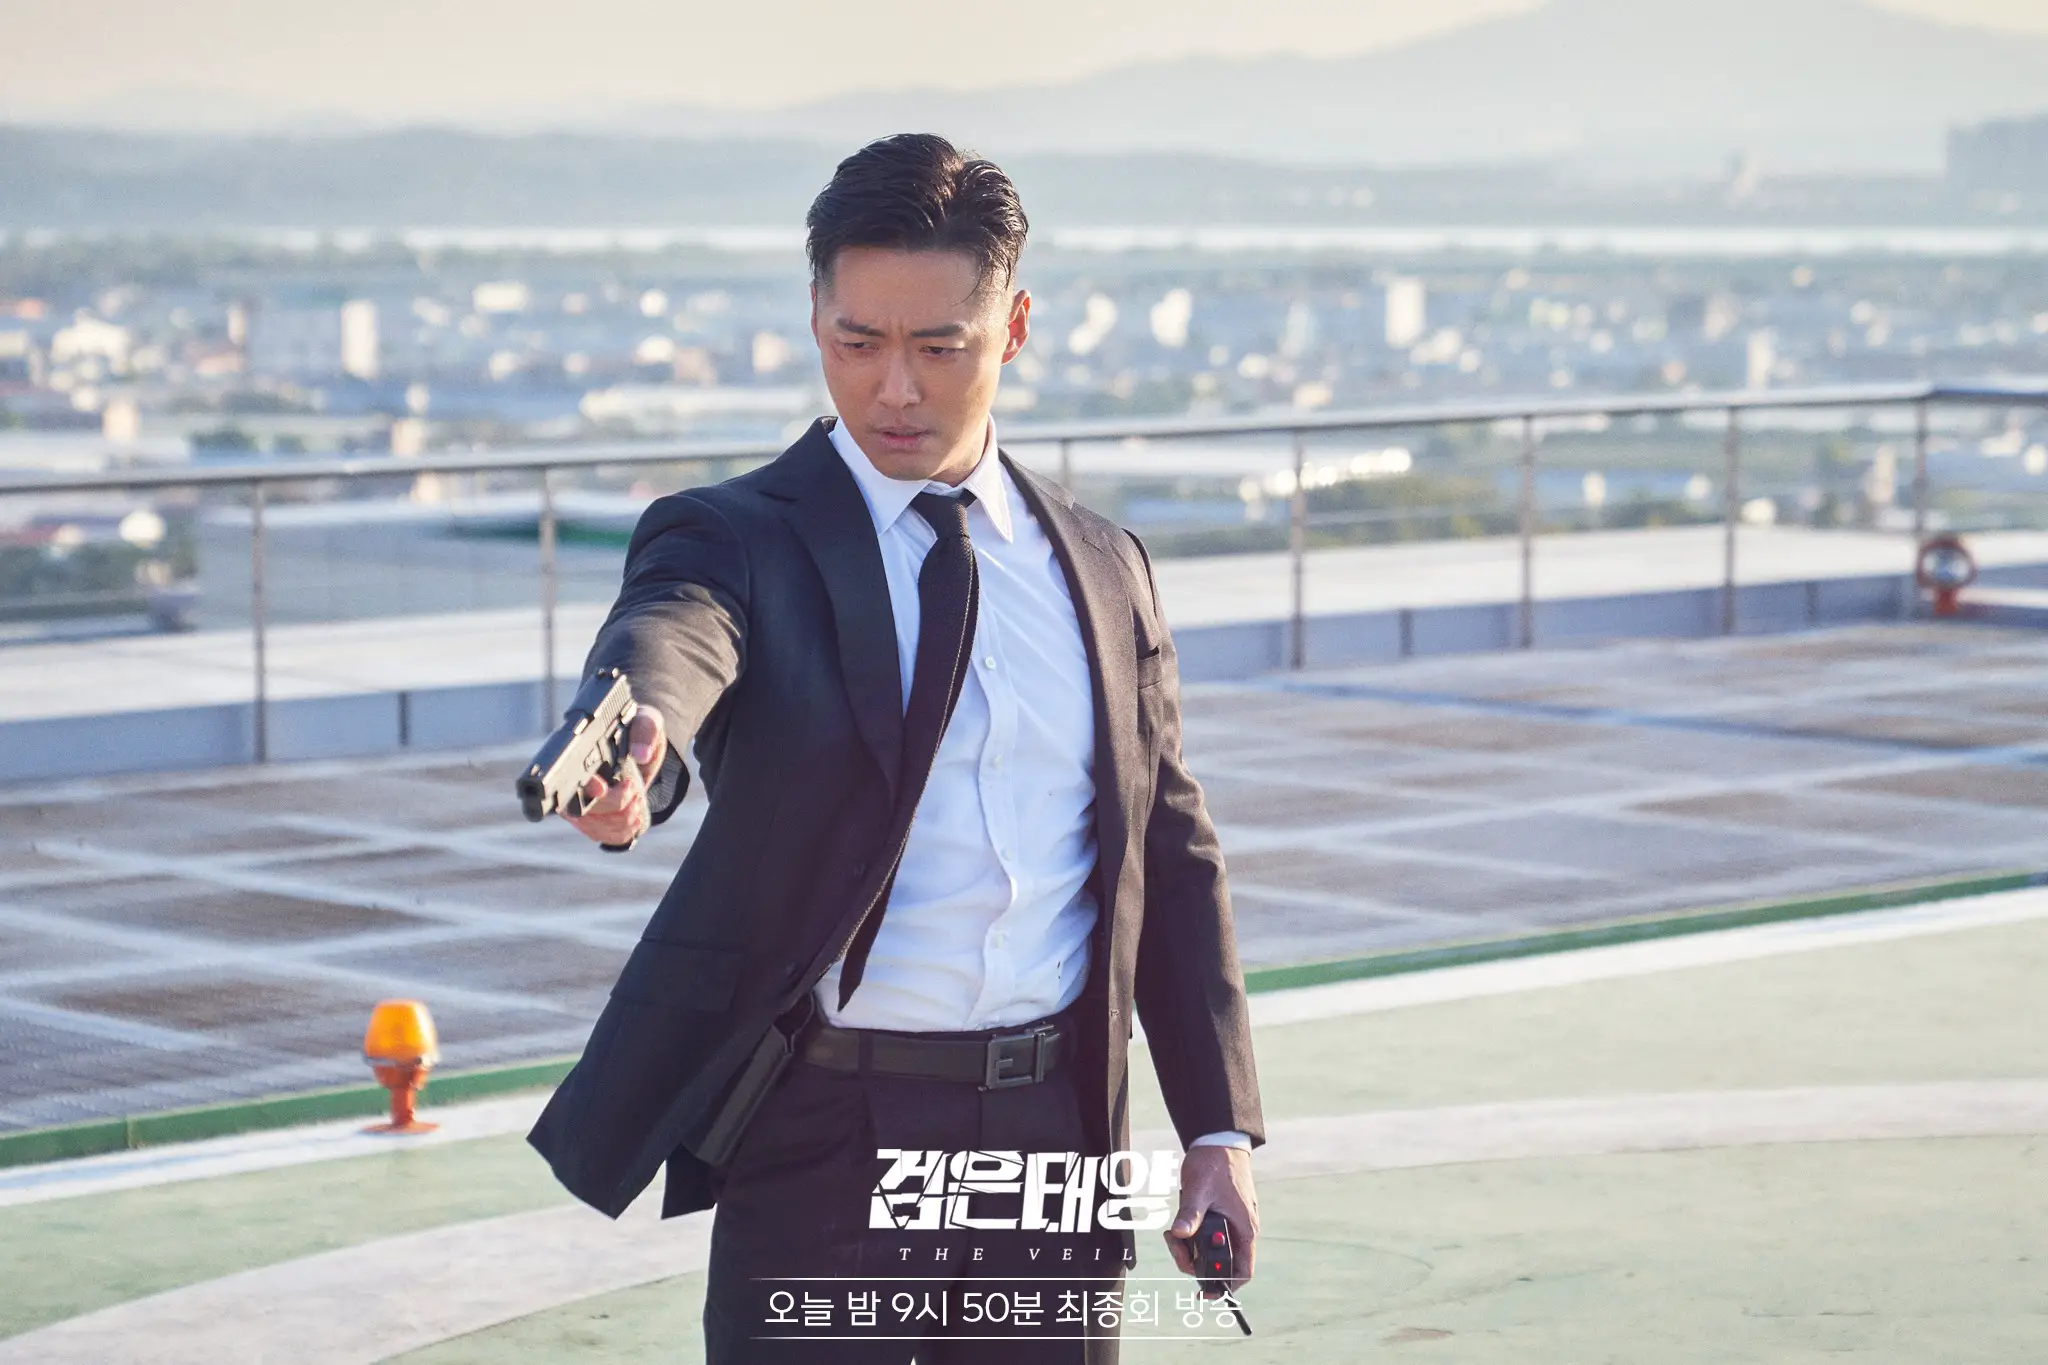 KDrama Review "The Veil" Takes SpyAction Series To Heightened Level